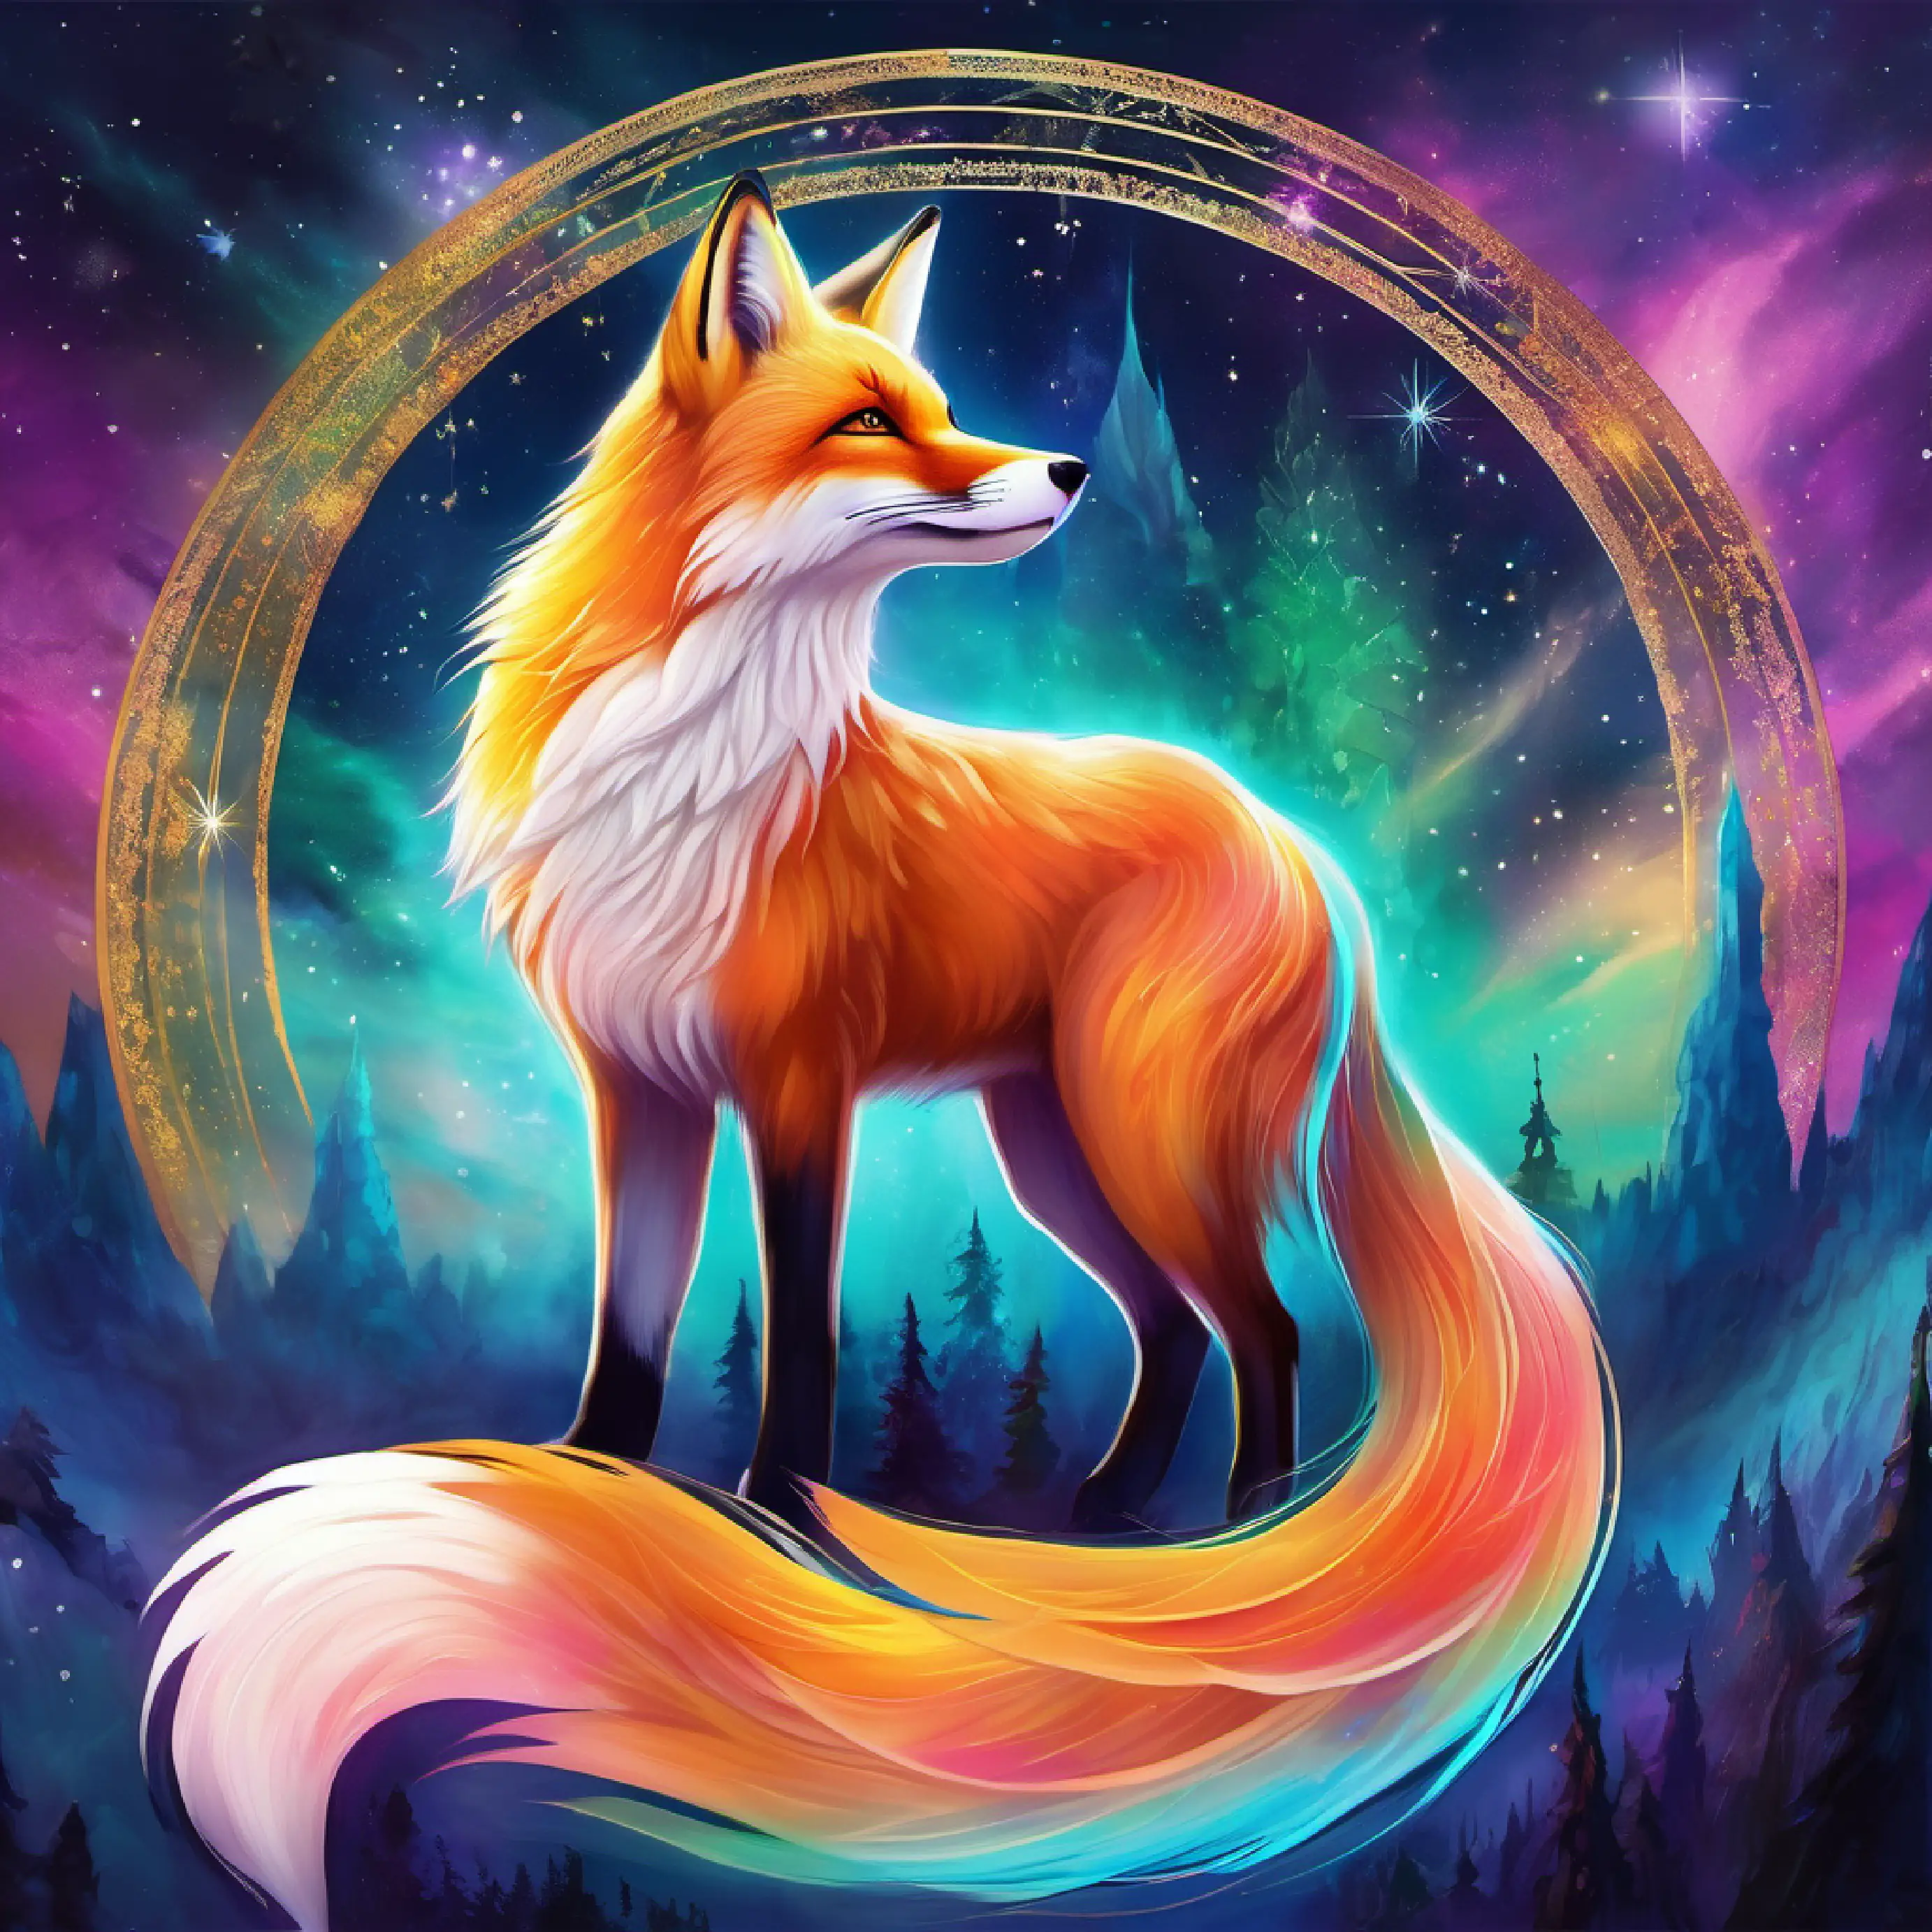 Fox feels gratitude and love for Aurora Spirit with ever-changing colorful aura, wise and kind.